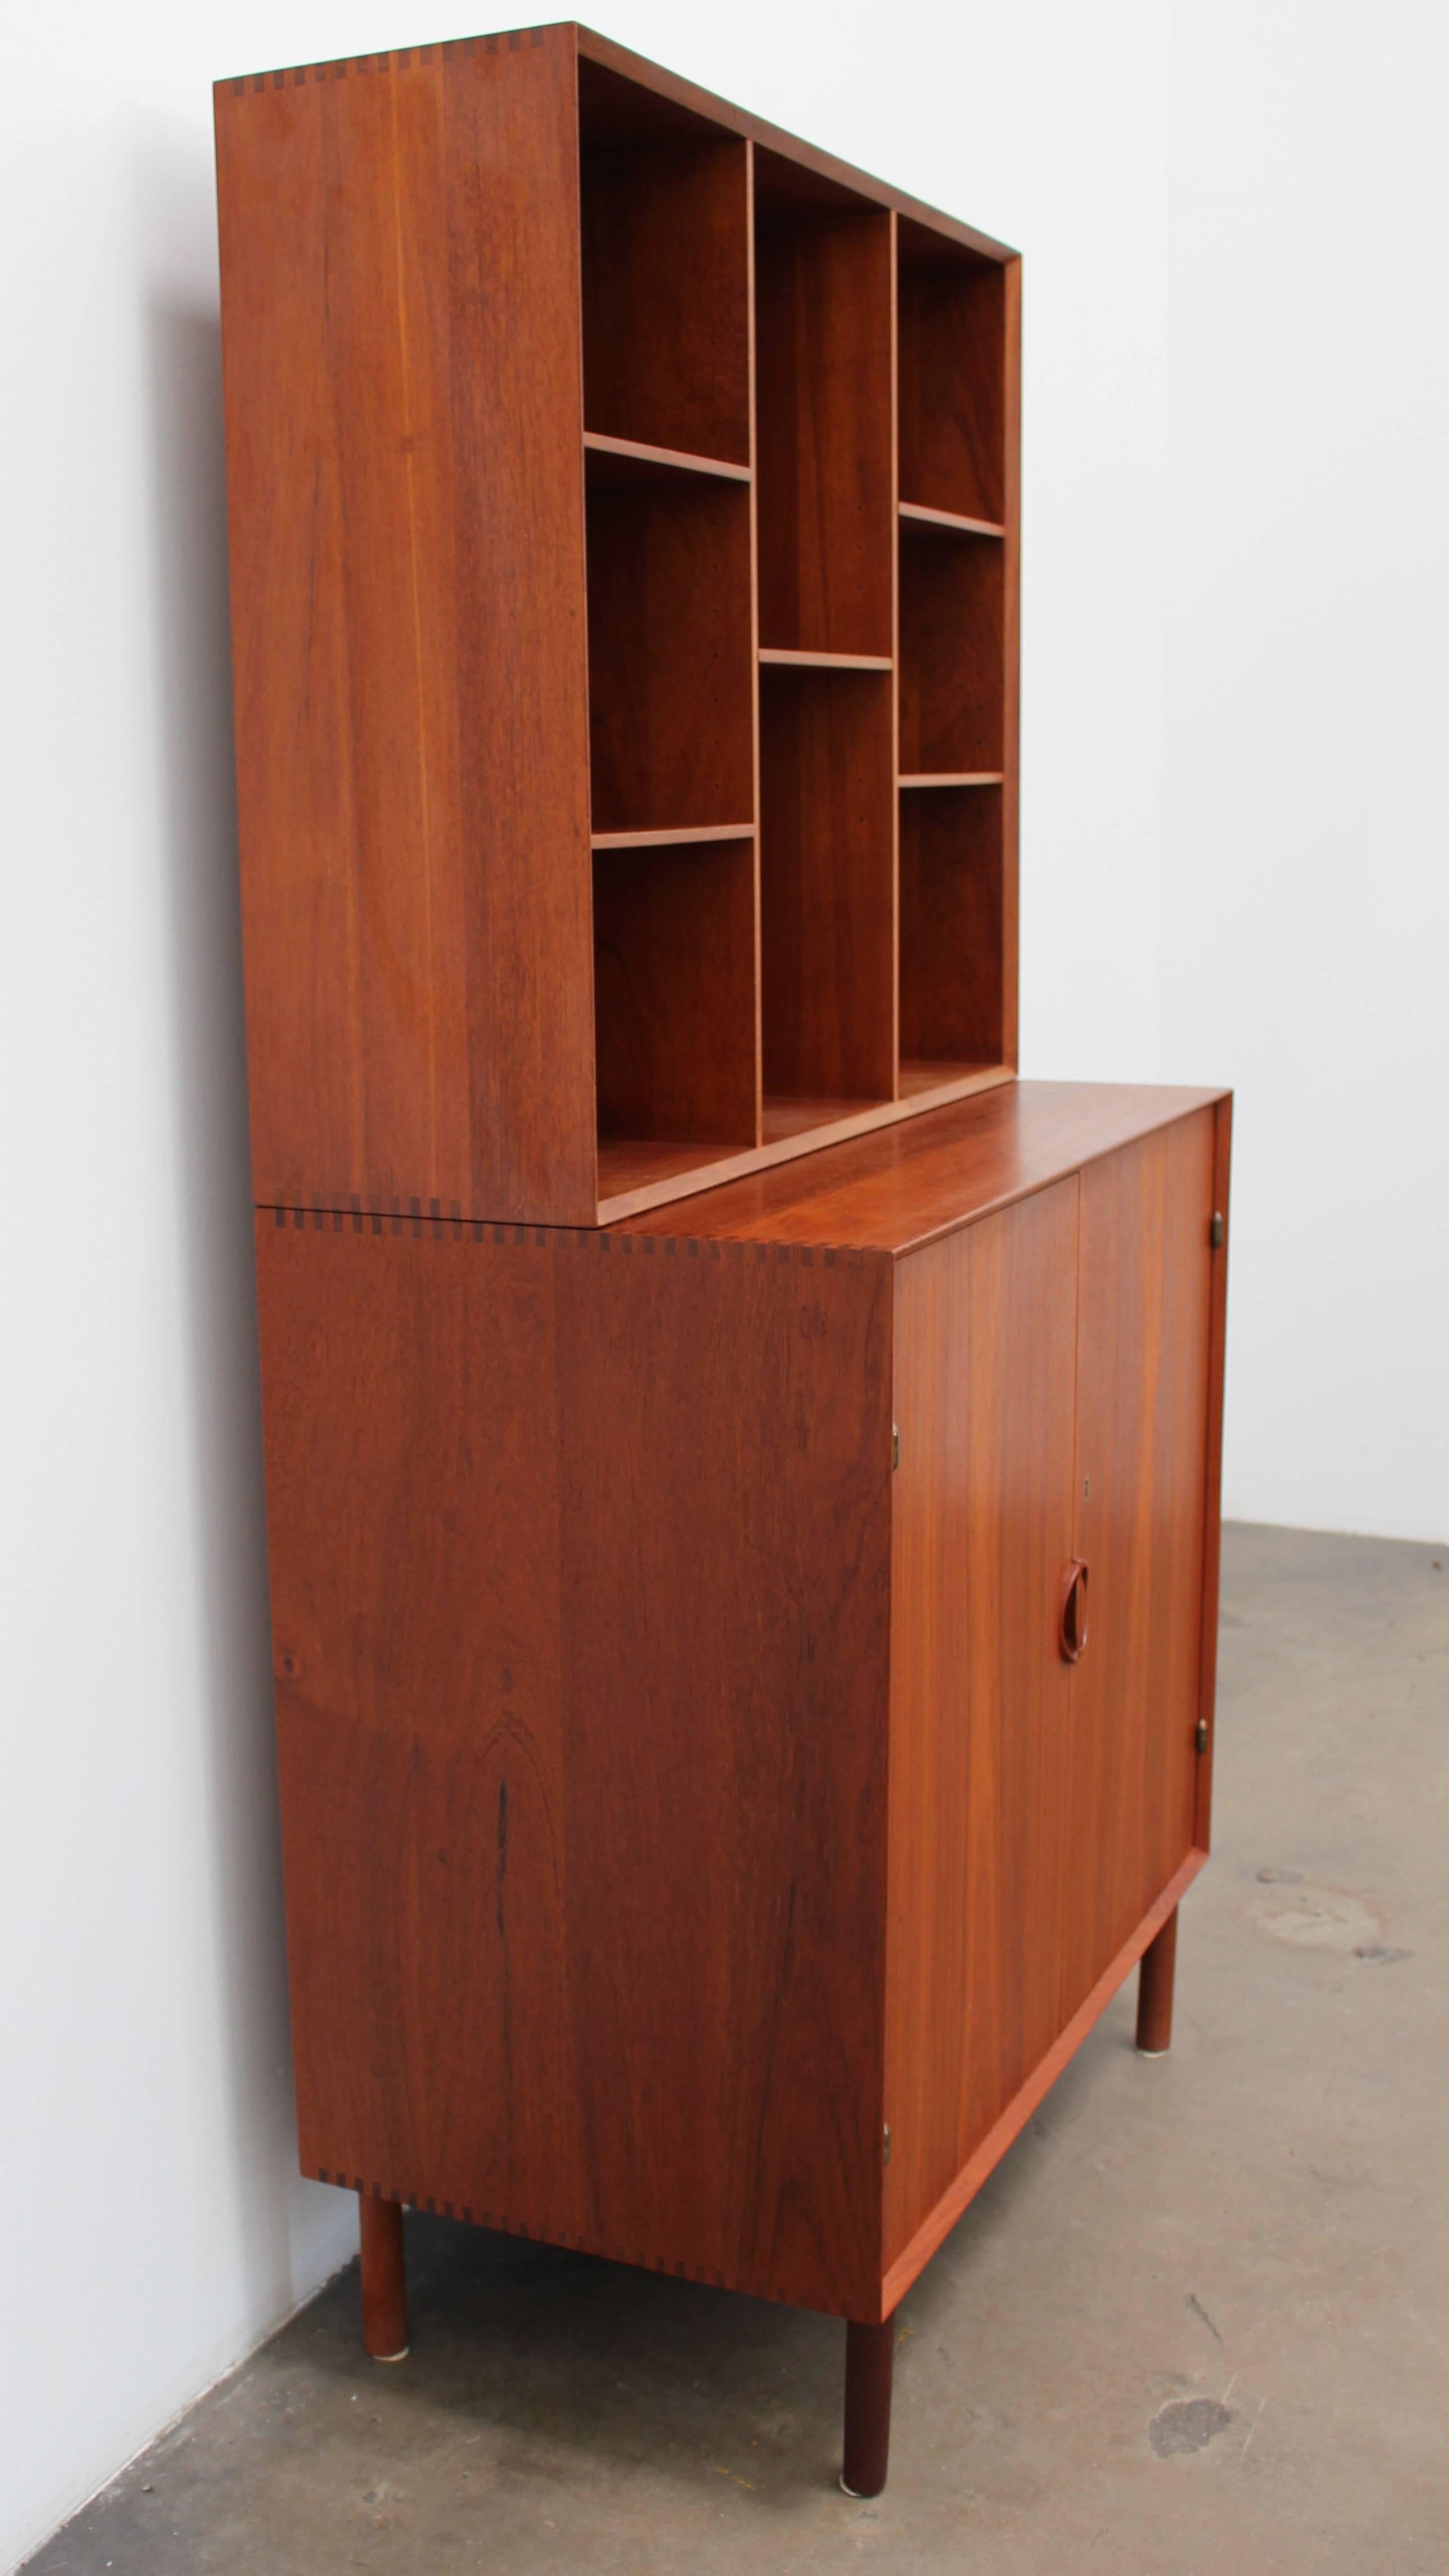 Beautiful cabinet designed by Hvidt + Mølgaard for Søborg Møbelfabrik circa the 1960s. The entire piece is constructed of solid teak. The listing comes with the shelf that can be stacked on top, or can be complete on its own (or maybe hung on the